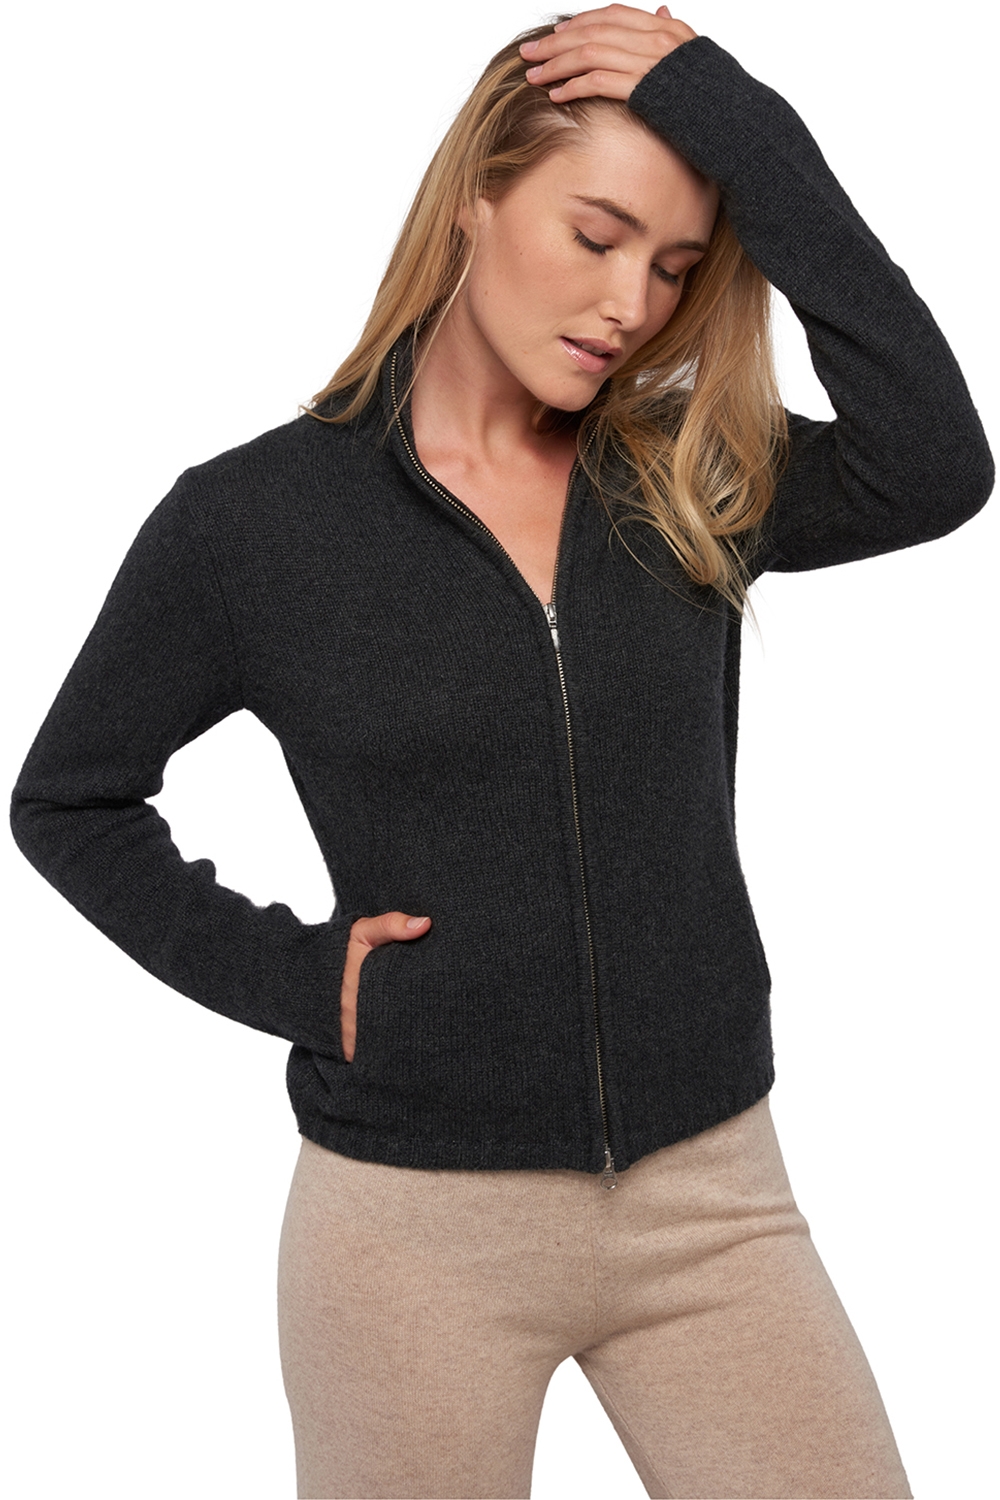 Cashmere ladies timeless classics elodie charcoal marl 3xl